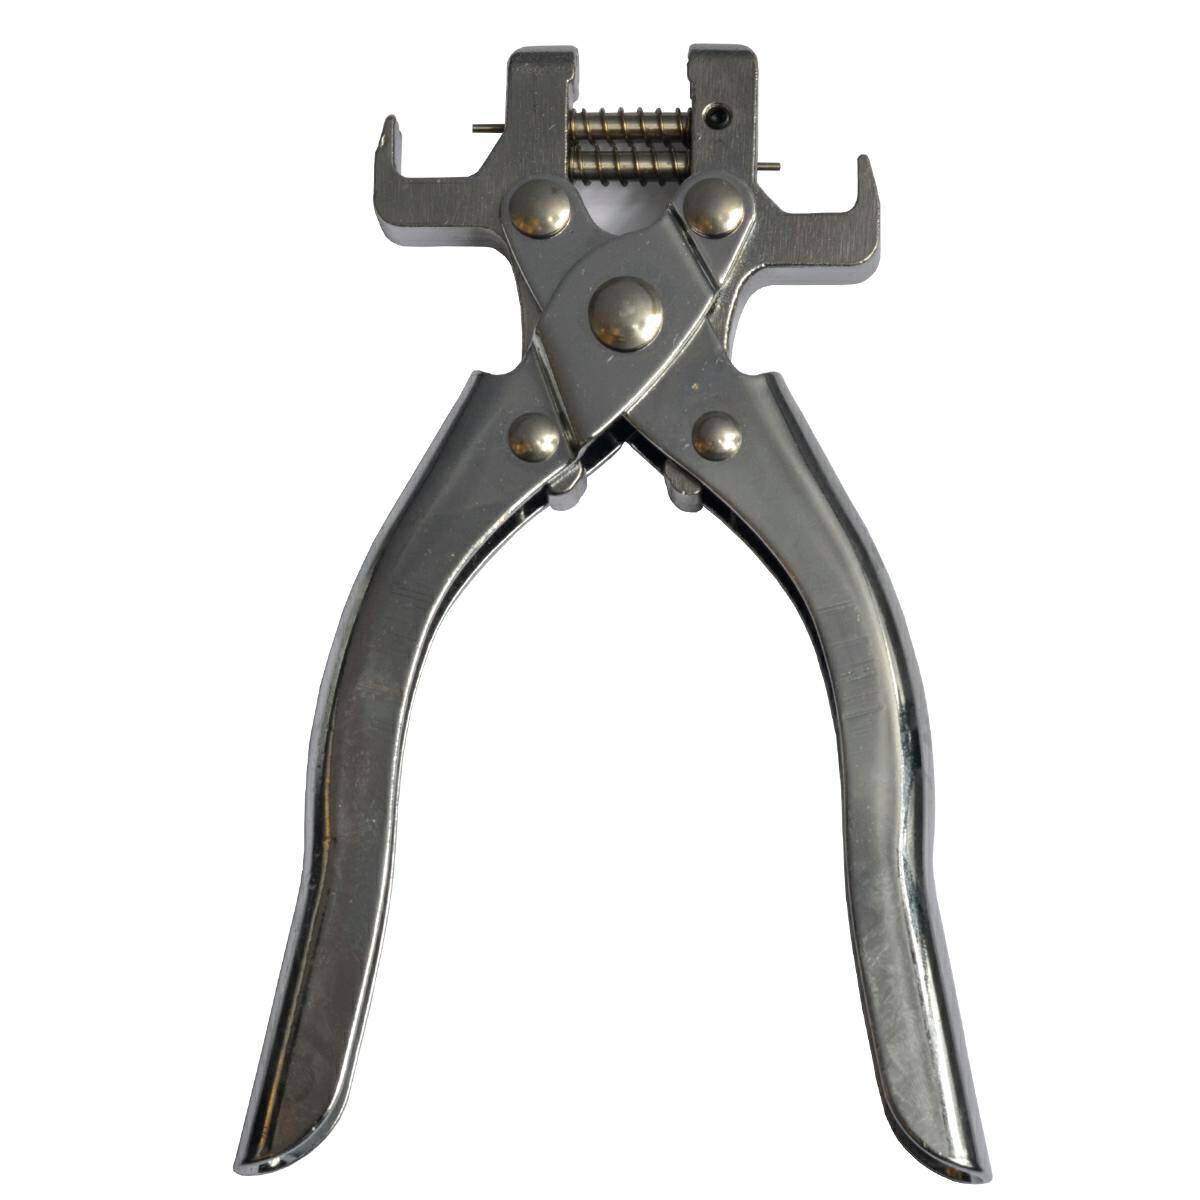 Rivet removal and insteellation tool